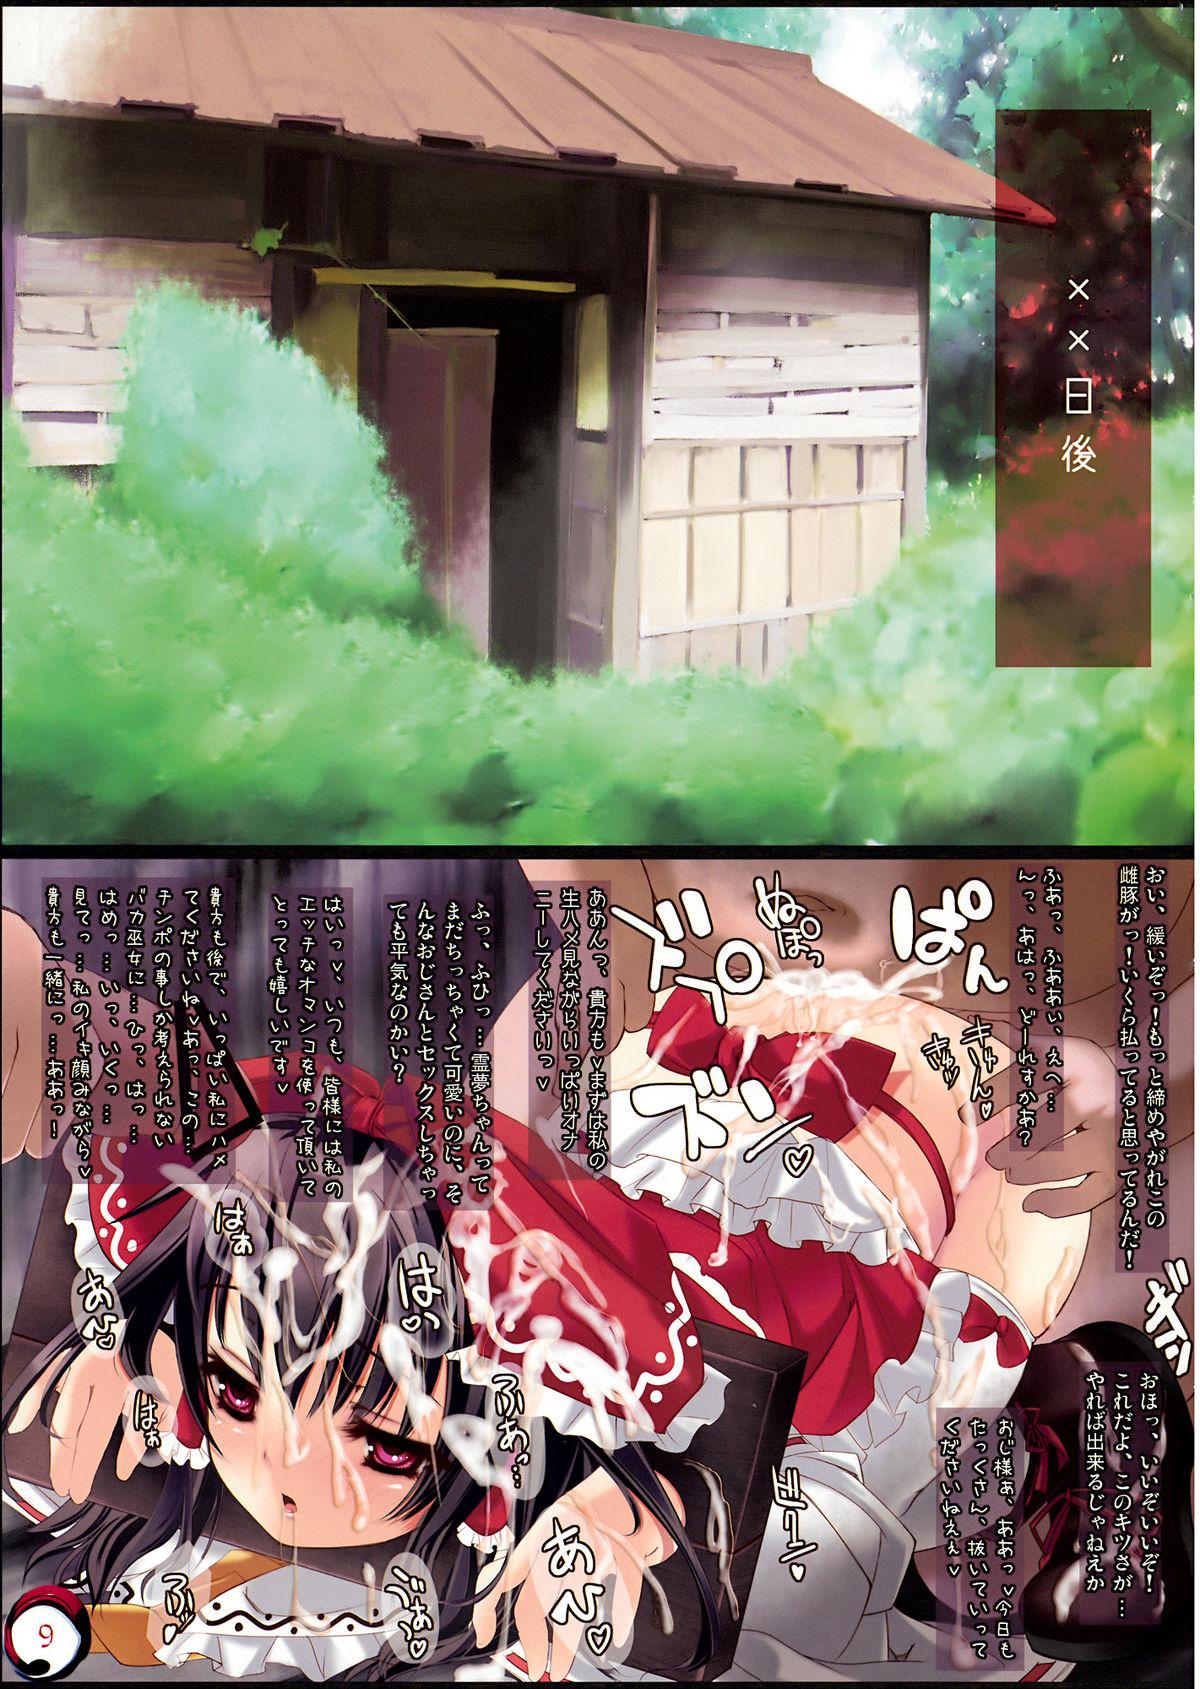 Grandmother Re: Ray Moon “Red” - Touhou project Worship - Page 9